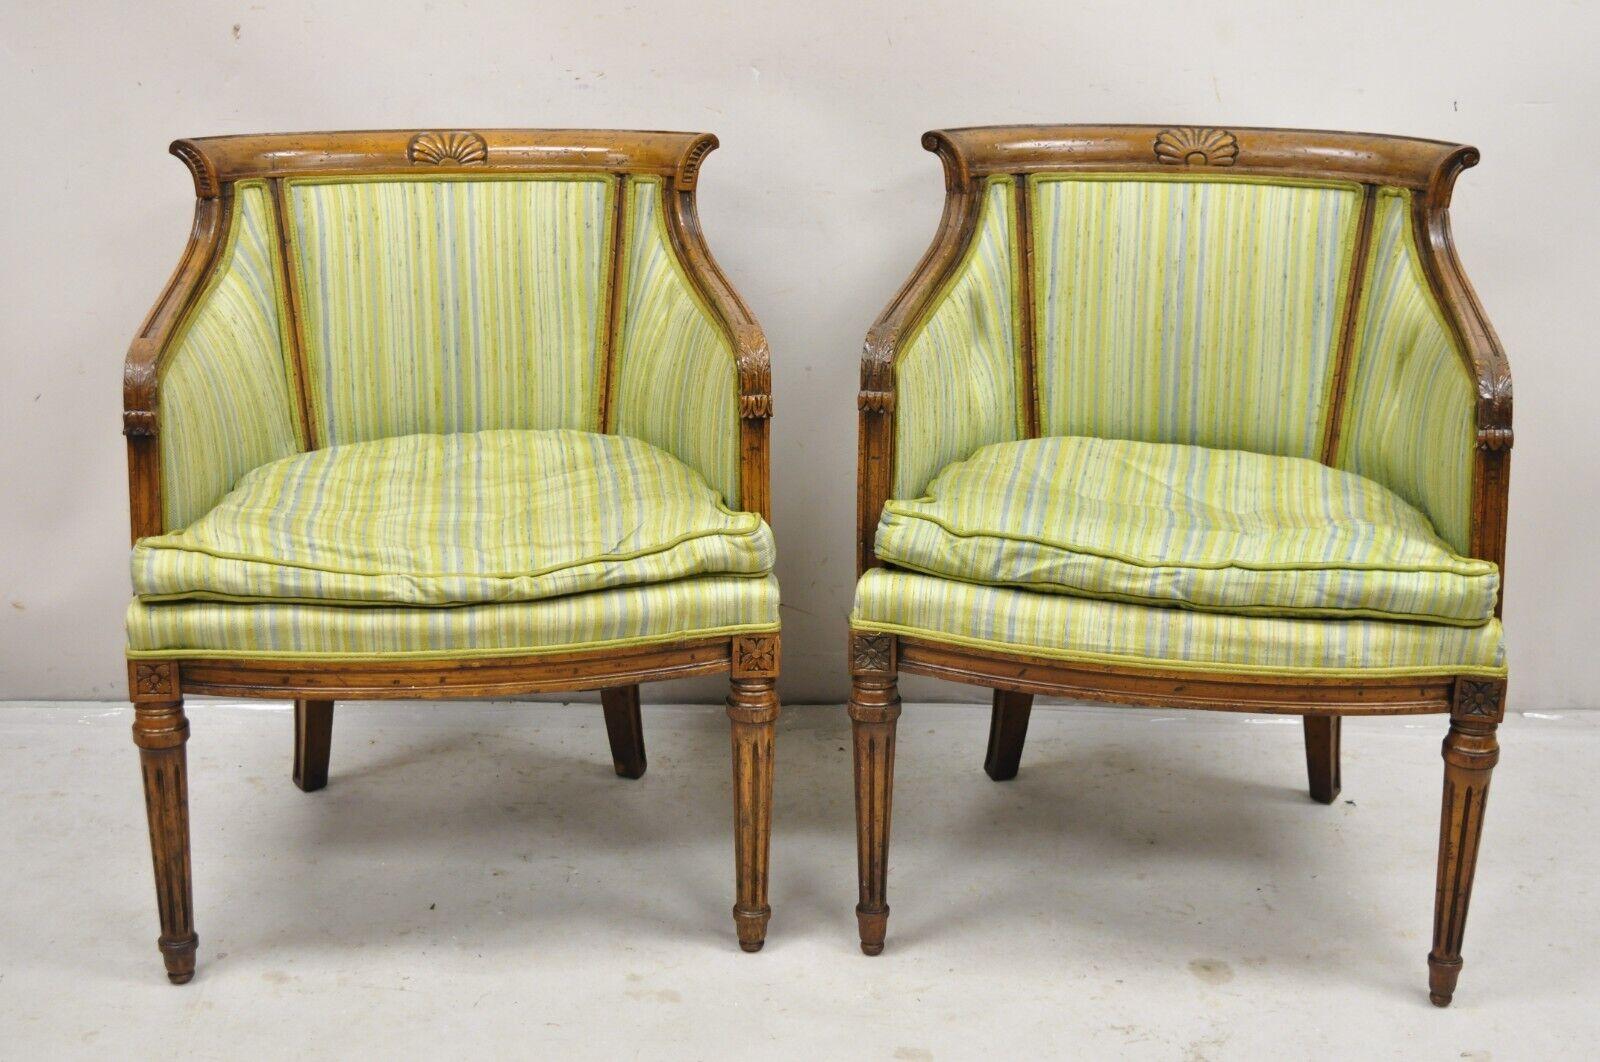 Antique Italian Regency Distressed Carved Walnut Barrel Back Club Chairs - a Pair. Item features solid carved walnut frames, distressed finish, shapely barrel backs. Slight variation in carving details and color between the chairs with examples